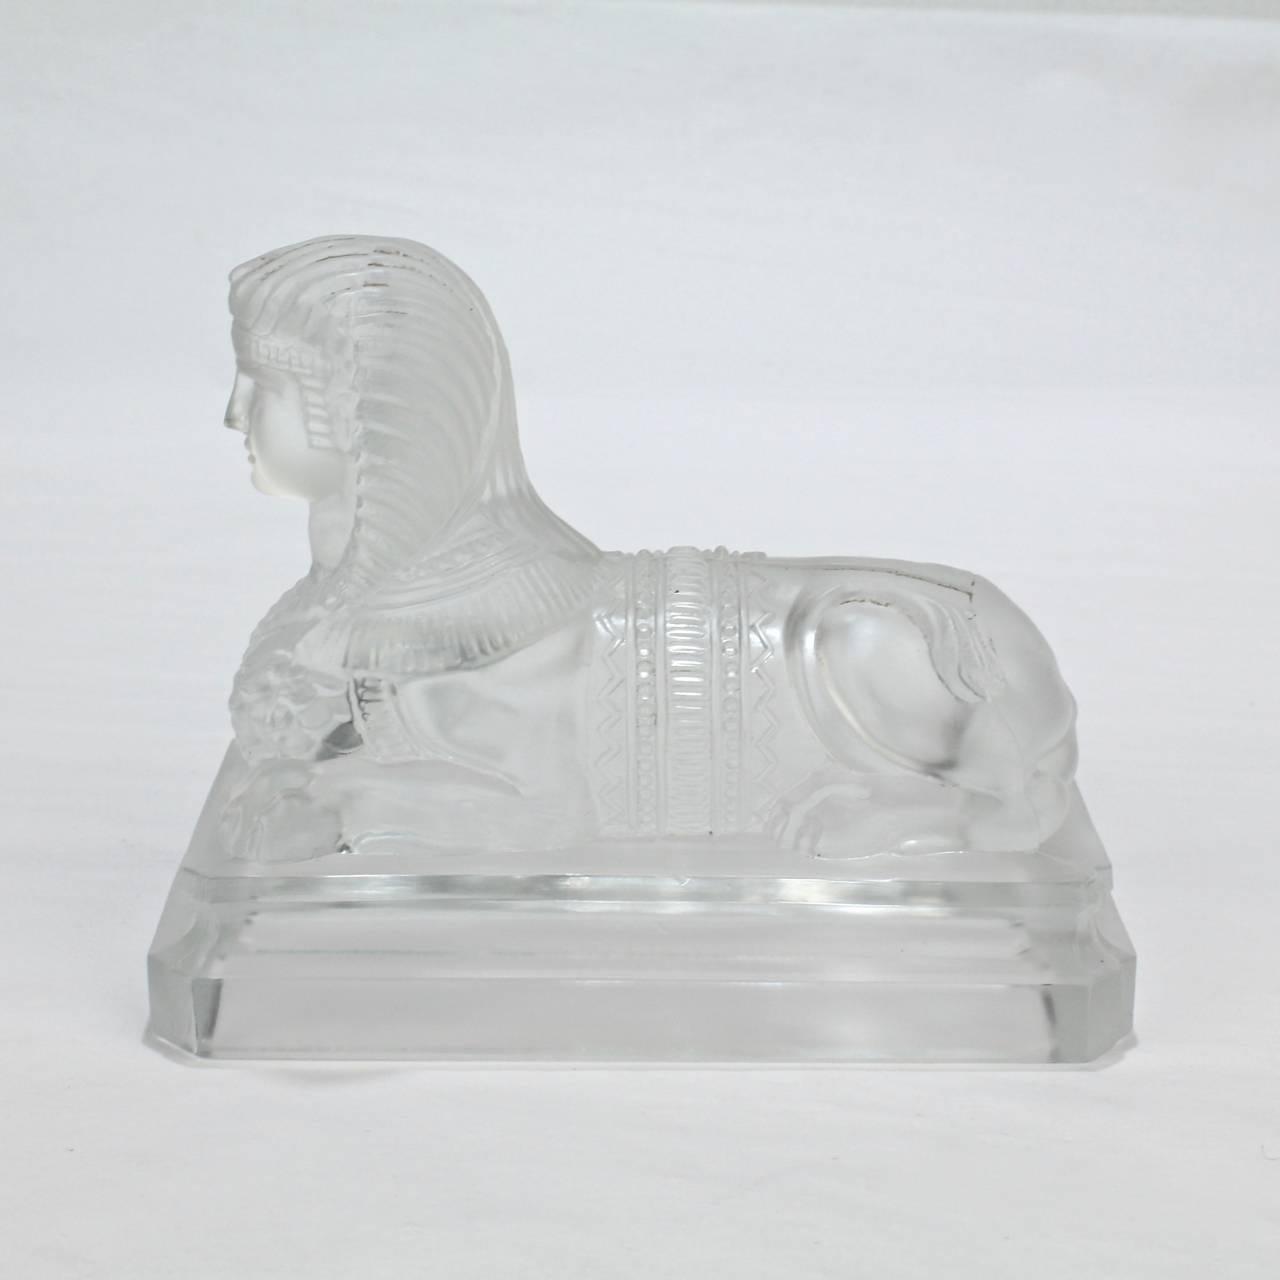 19th Century Antique French Egyptian Revival Frosted Glass Sphinx Paperweight by Saint Louis